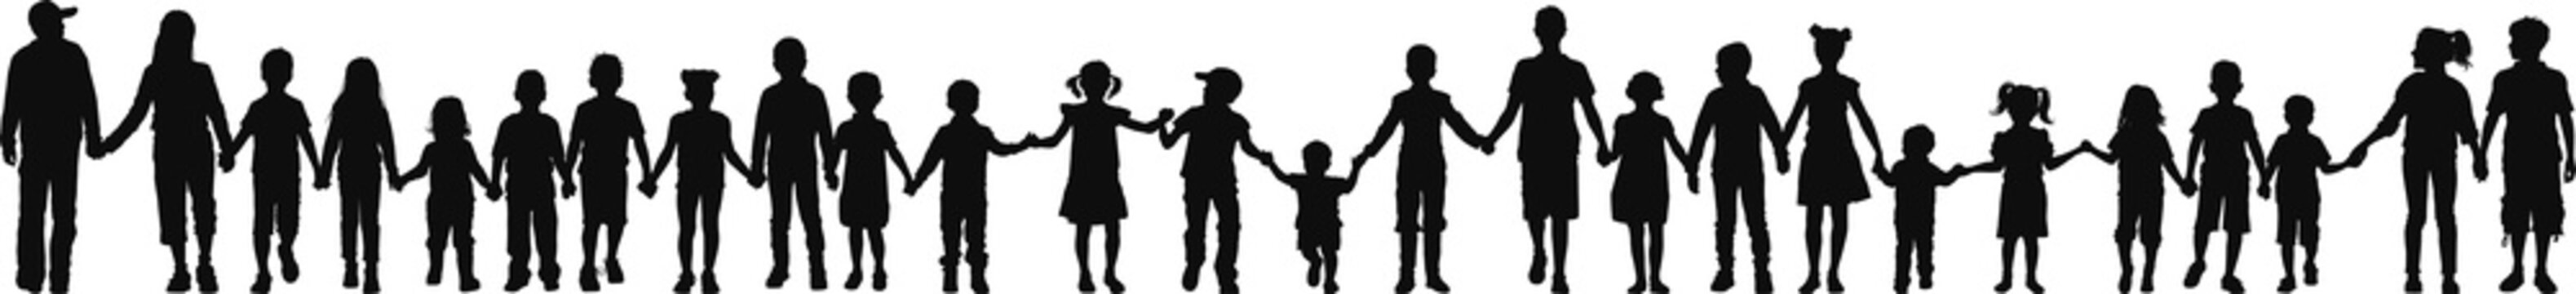 Group of children walking together hand in hand vector silhouette collection 